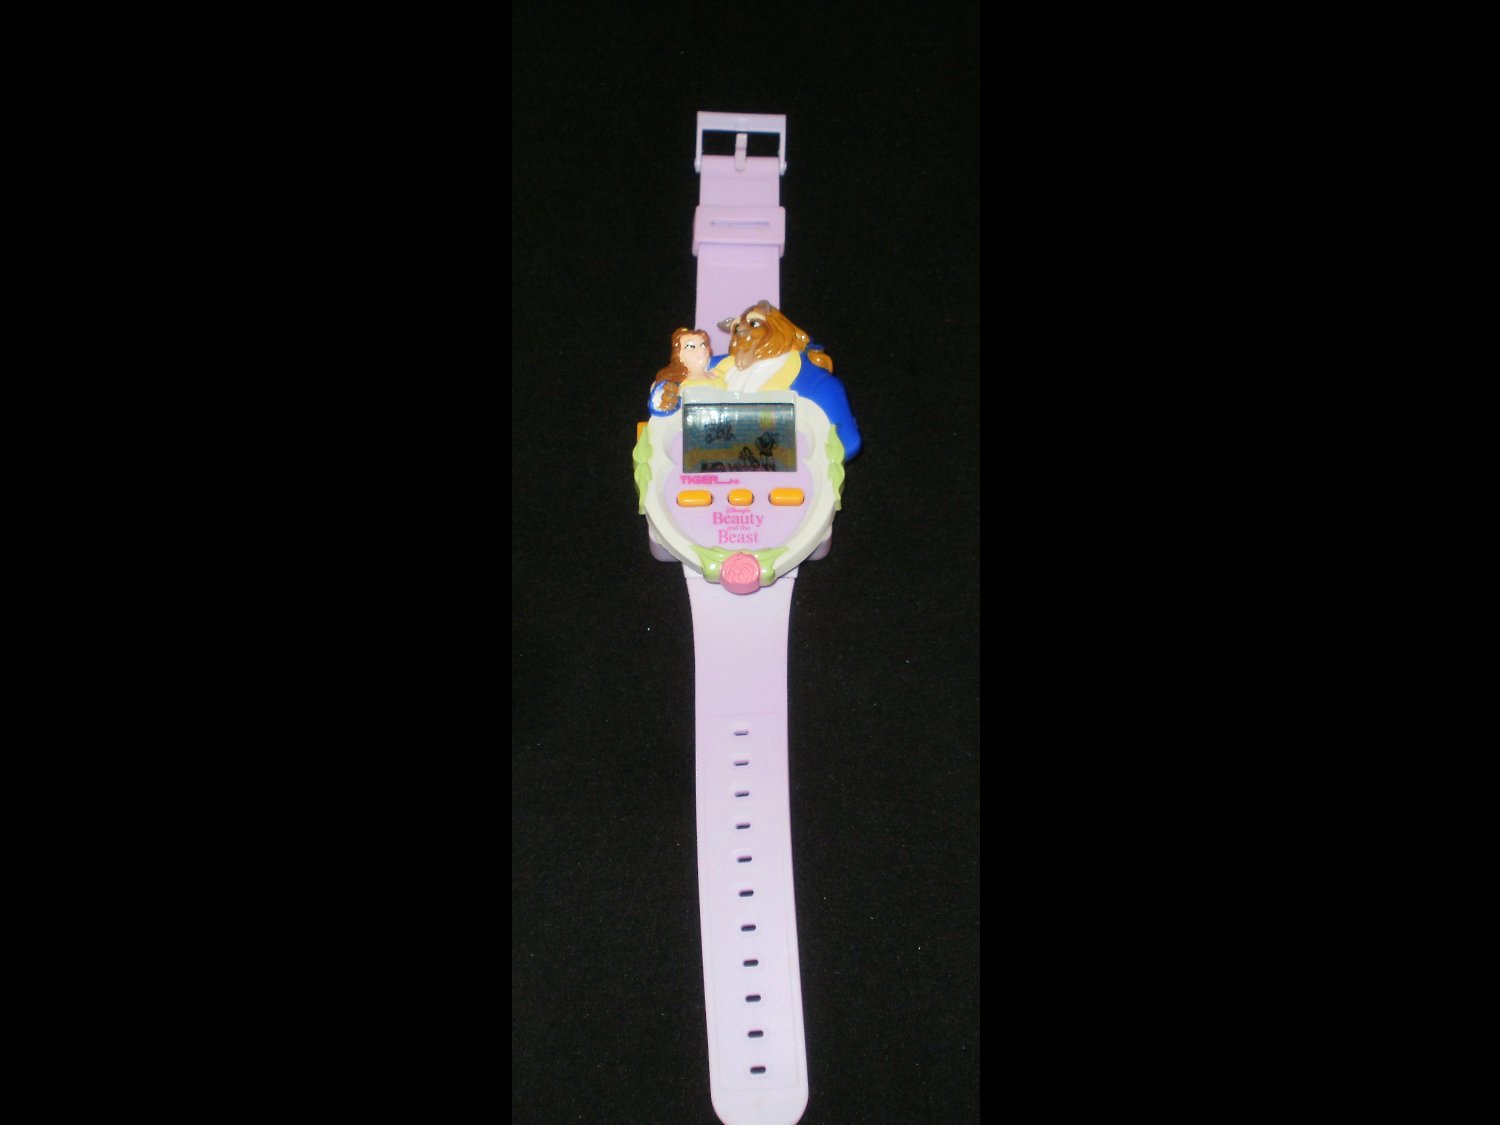 Beauty and the Beast - Vintage Handheld Watch - Tiger Electronics 1992